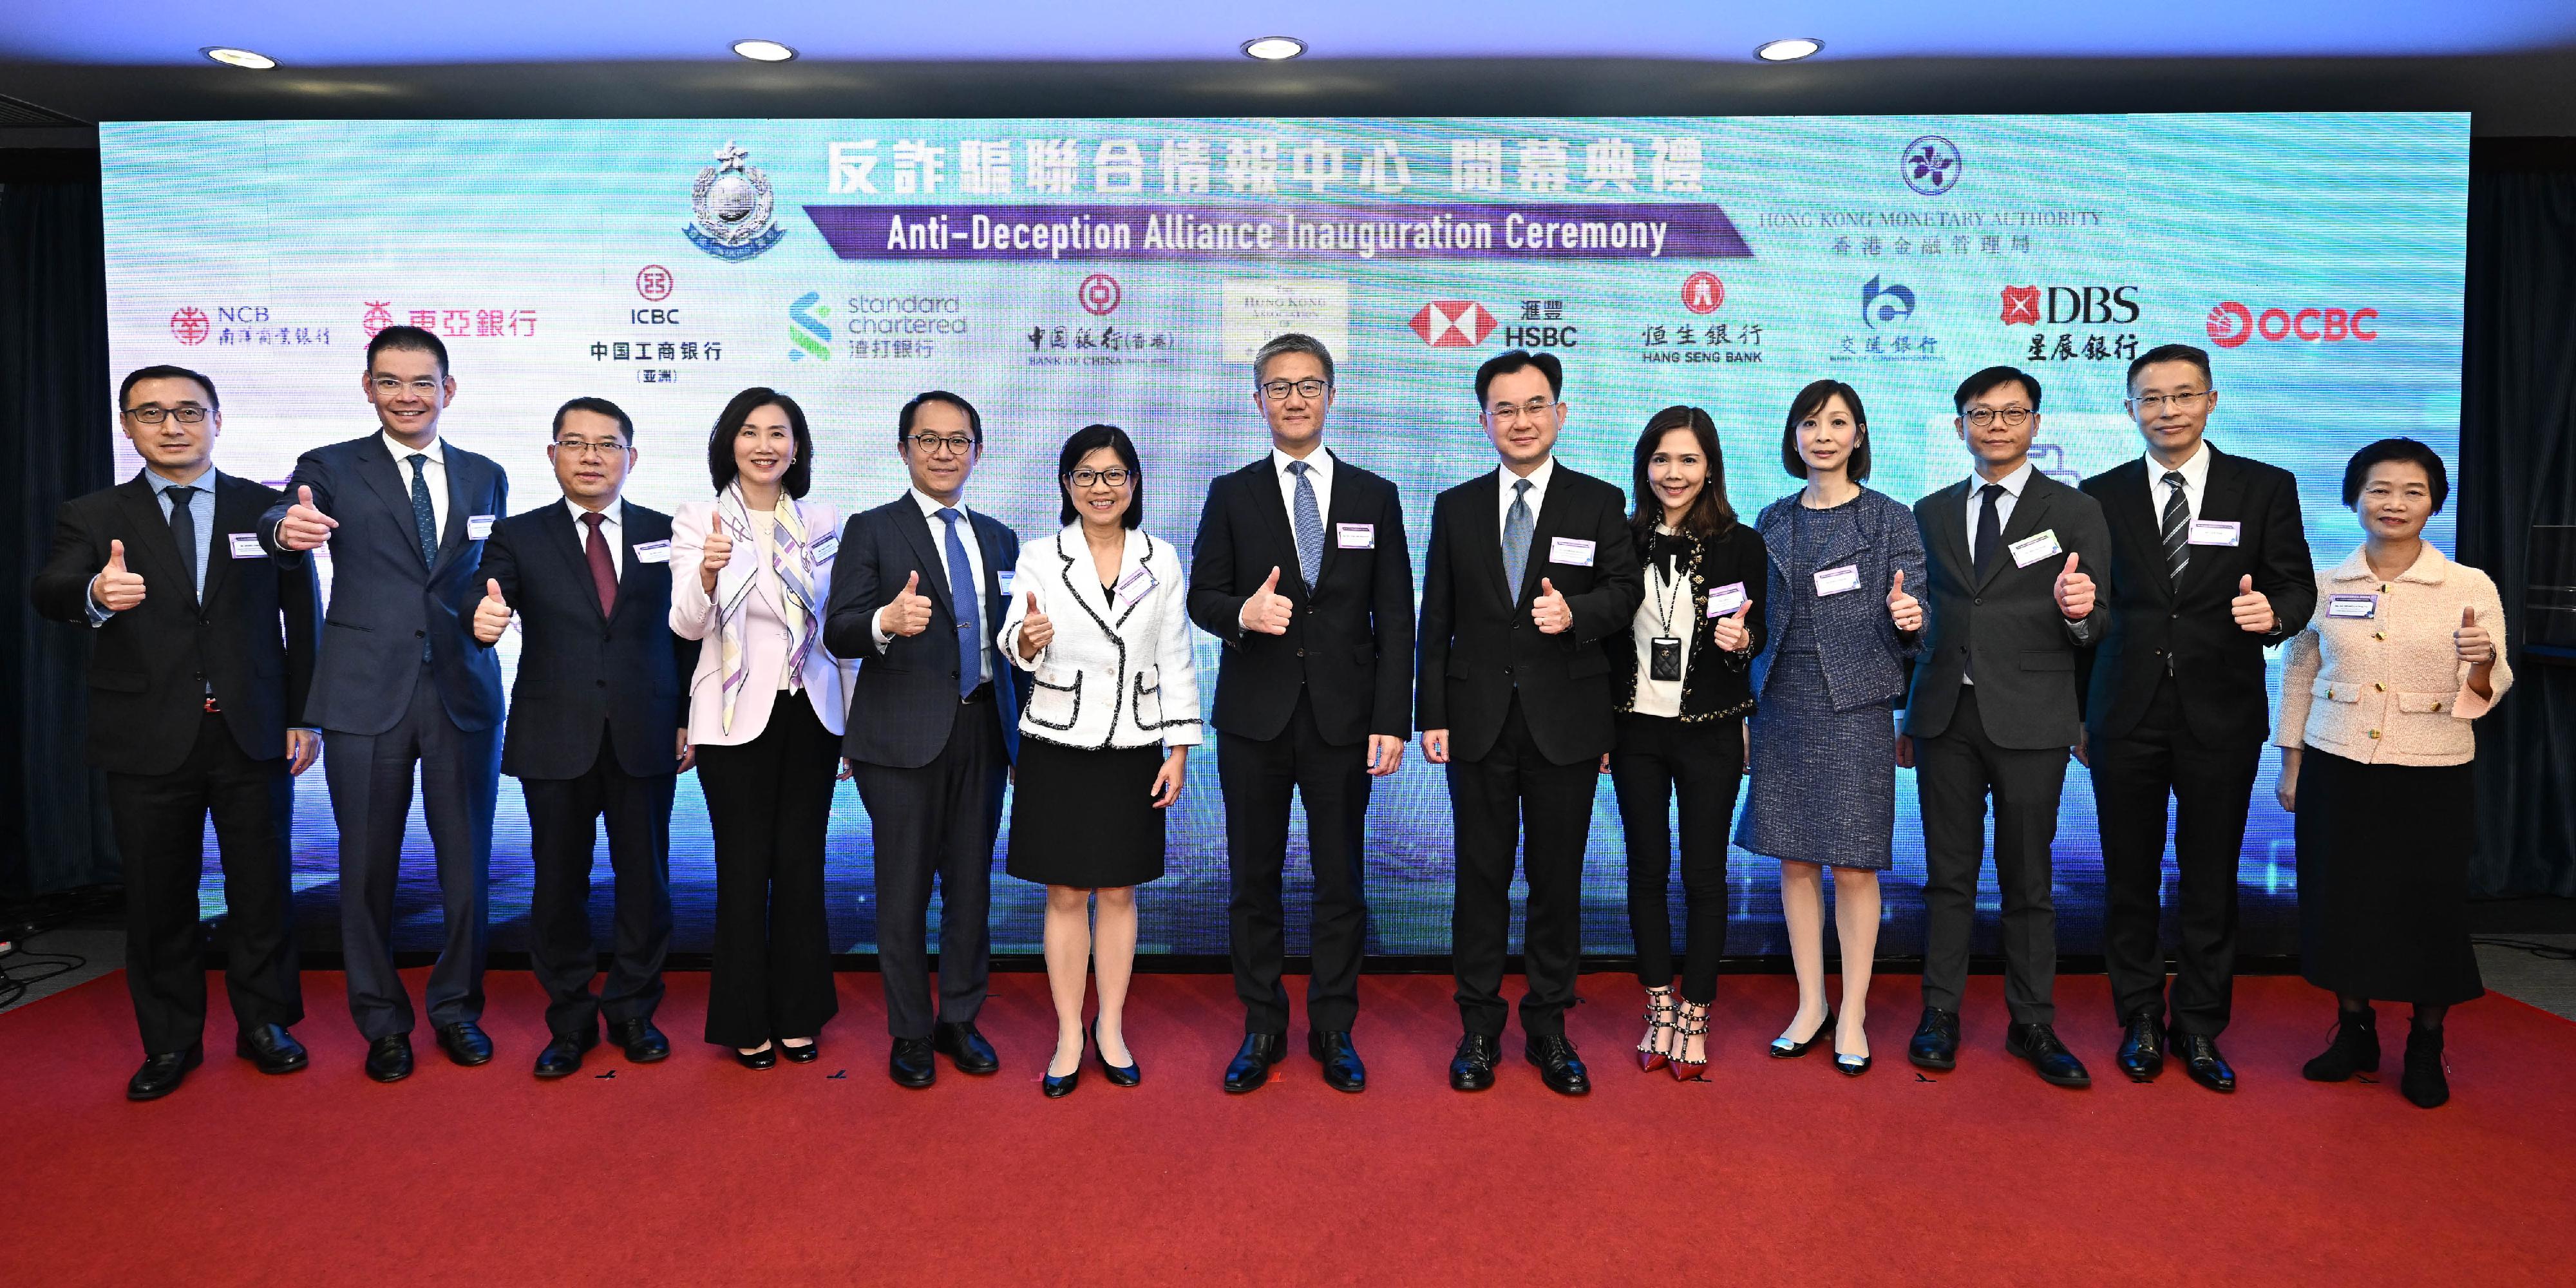 The Hong Kong Police Force (HKPF) held the inauguration ceremony for the Anti-Deception Alliance today (November 24). Photo shows the Commissioner of Police, Mr Siu Chak-yee (seventh left); the Executive Director (Enforcement and AML) of the Hong Kong Monetary Authority, Ms Carmen Chu (sixth left); Acting Chairman of the Hong Kong Association of Banks, Mr Stephen Chan (sixth right); and other guests at the opening ceremony.